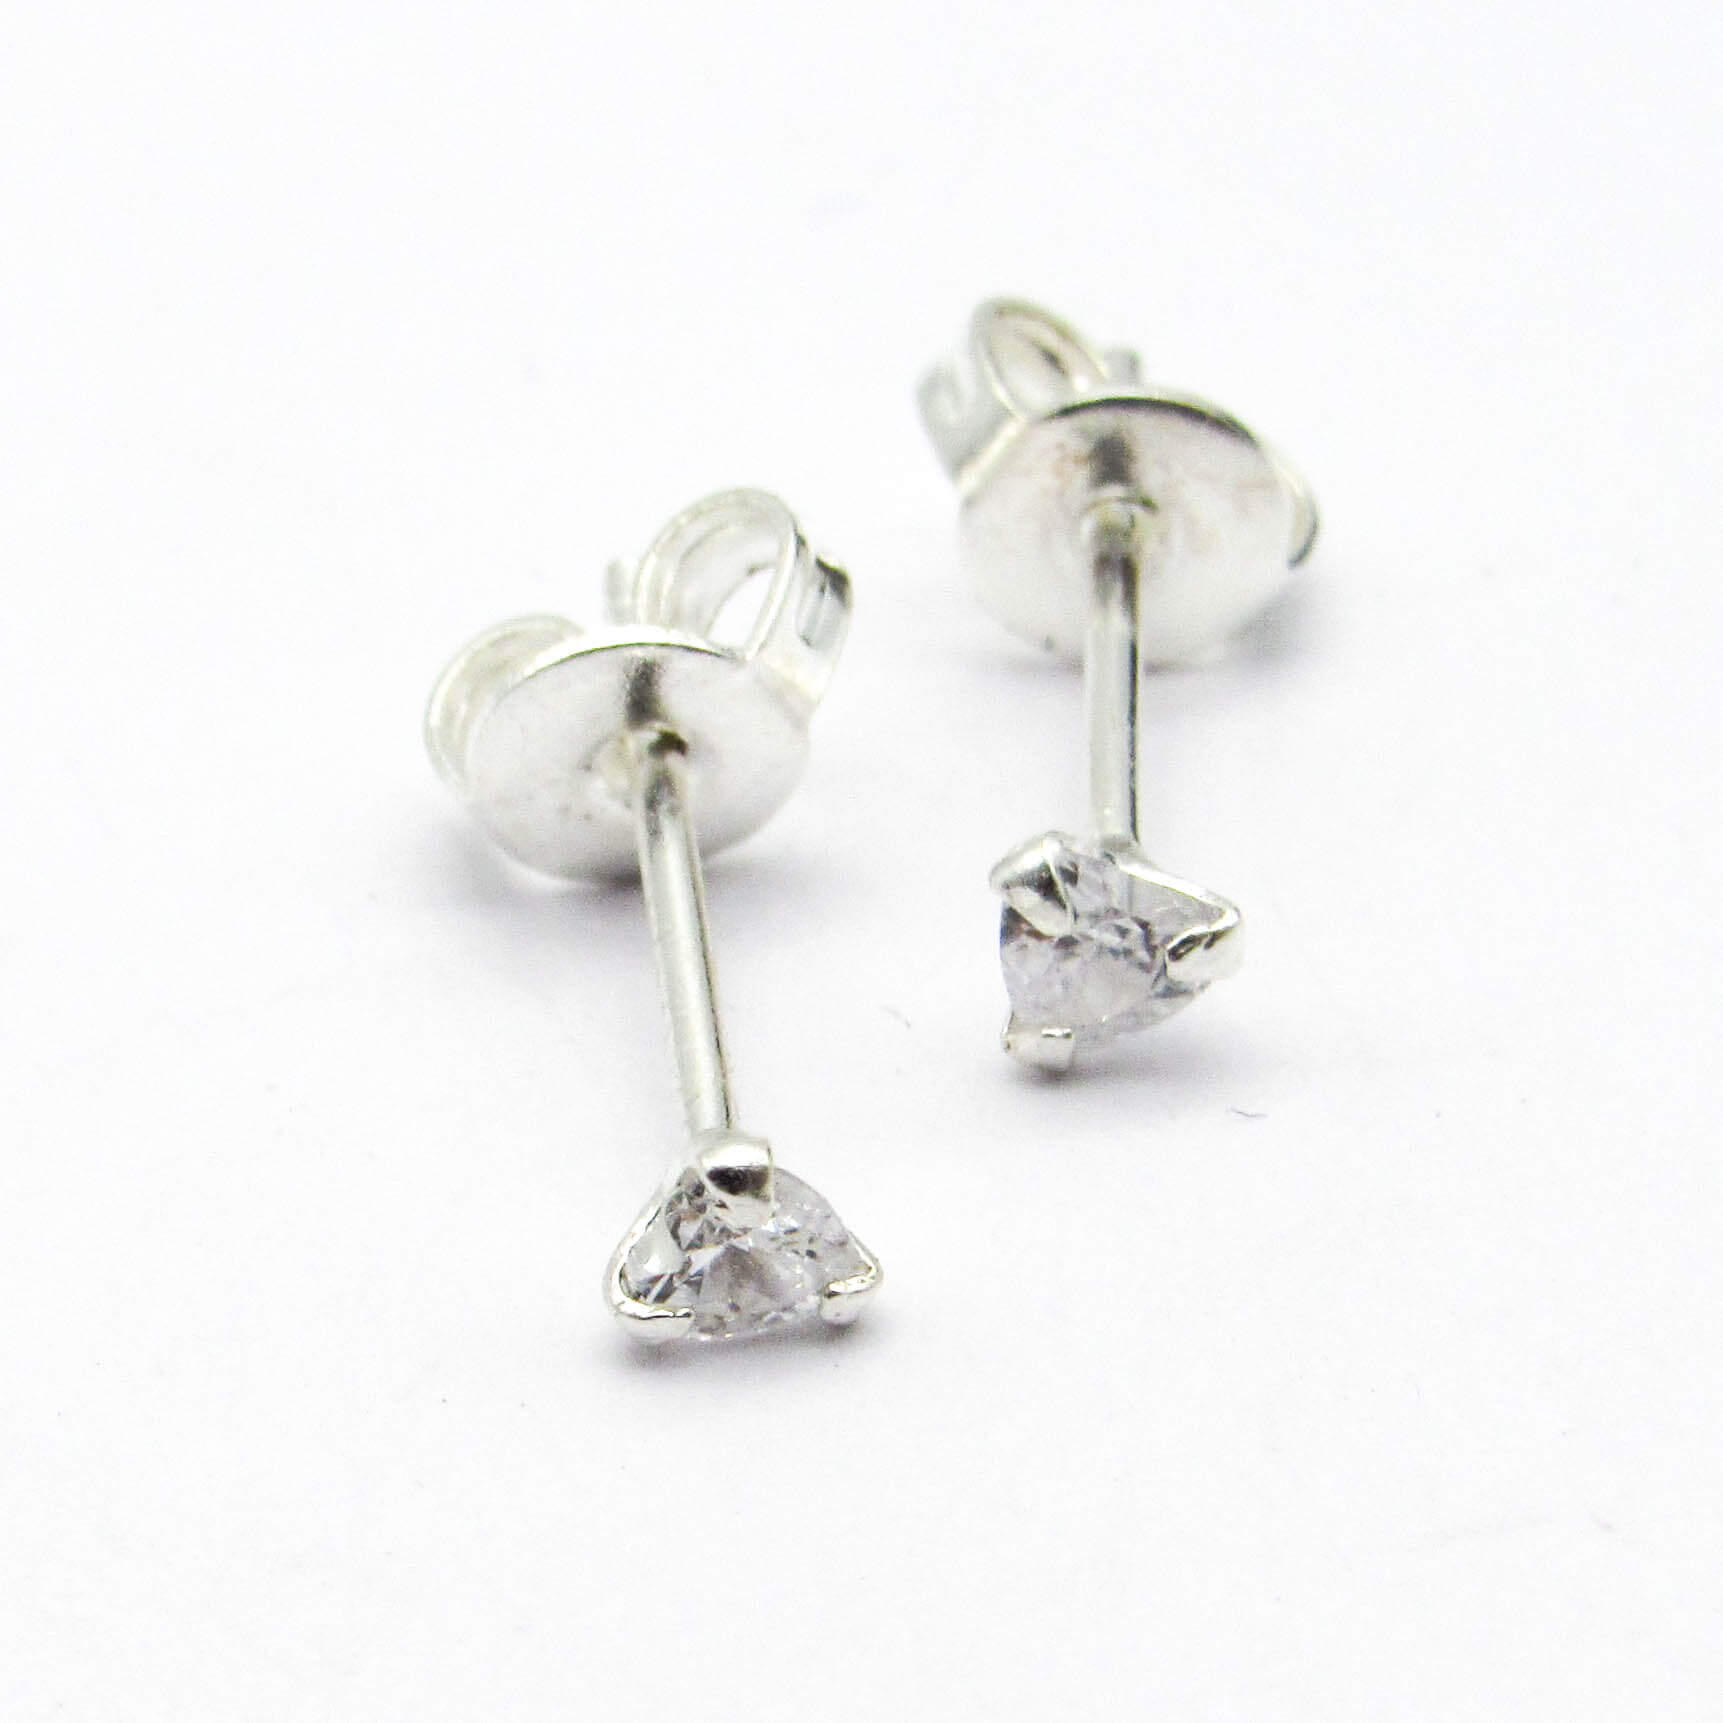 AROS CORAZON CUBIC 3MM GRIFAS /PLATA